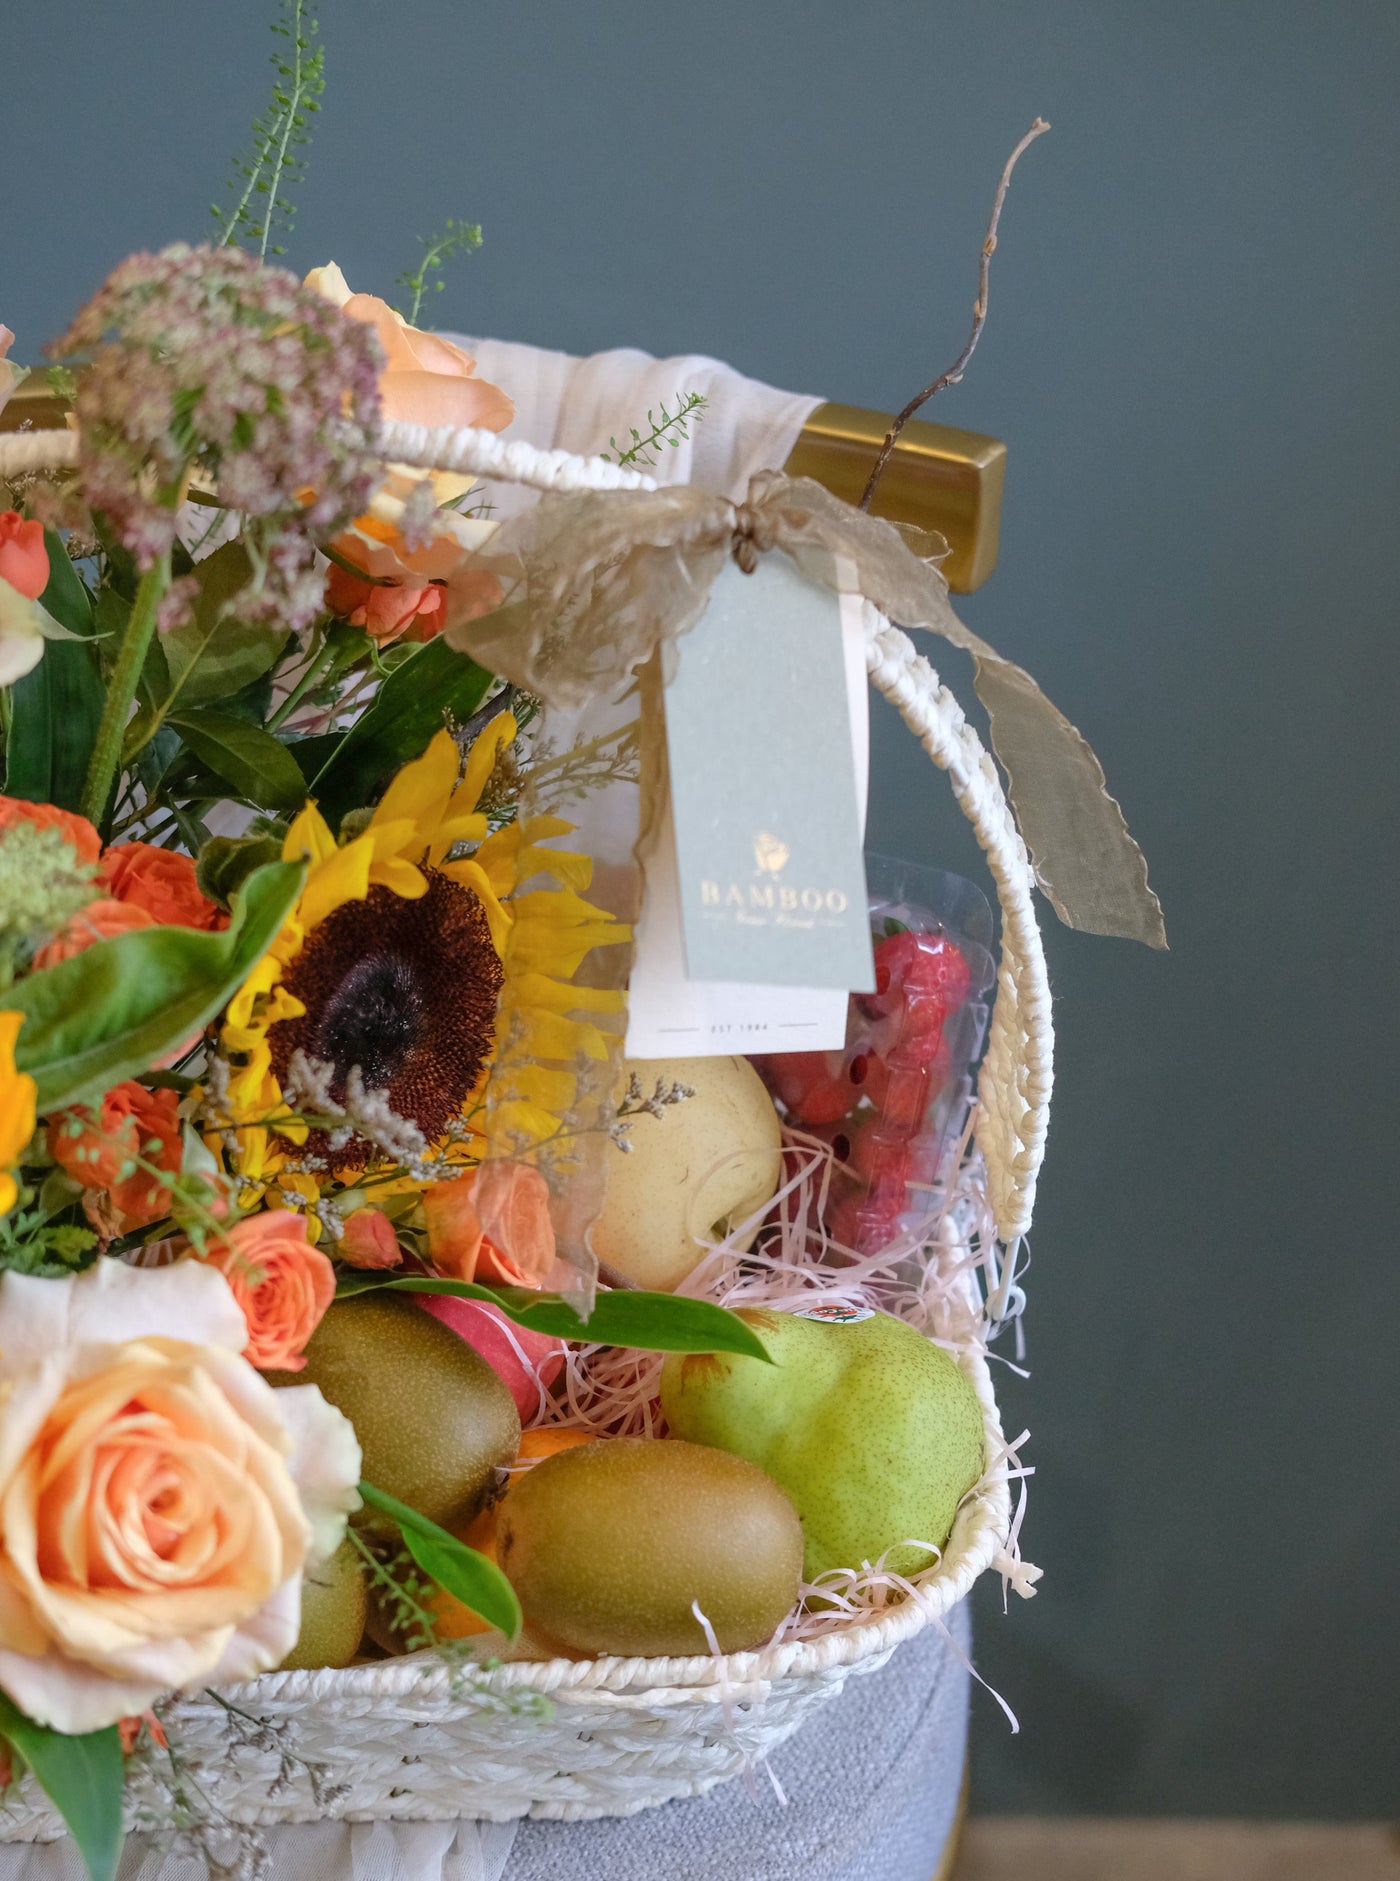 Featuring an array of juicy fruits, such as grapes, apples and oranges, this generous gift is certain to get you into their good books. Accented by a beautiful flower arrangement of sunflowers, roses, ping pongs & fillers. Same day fruit basket delivery in Penang and Butterworth.